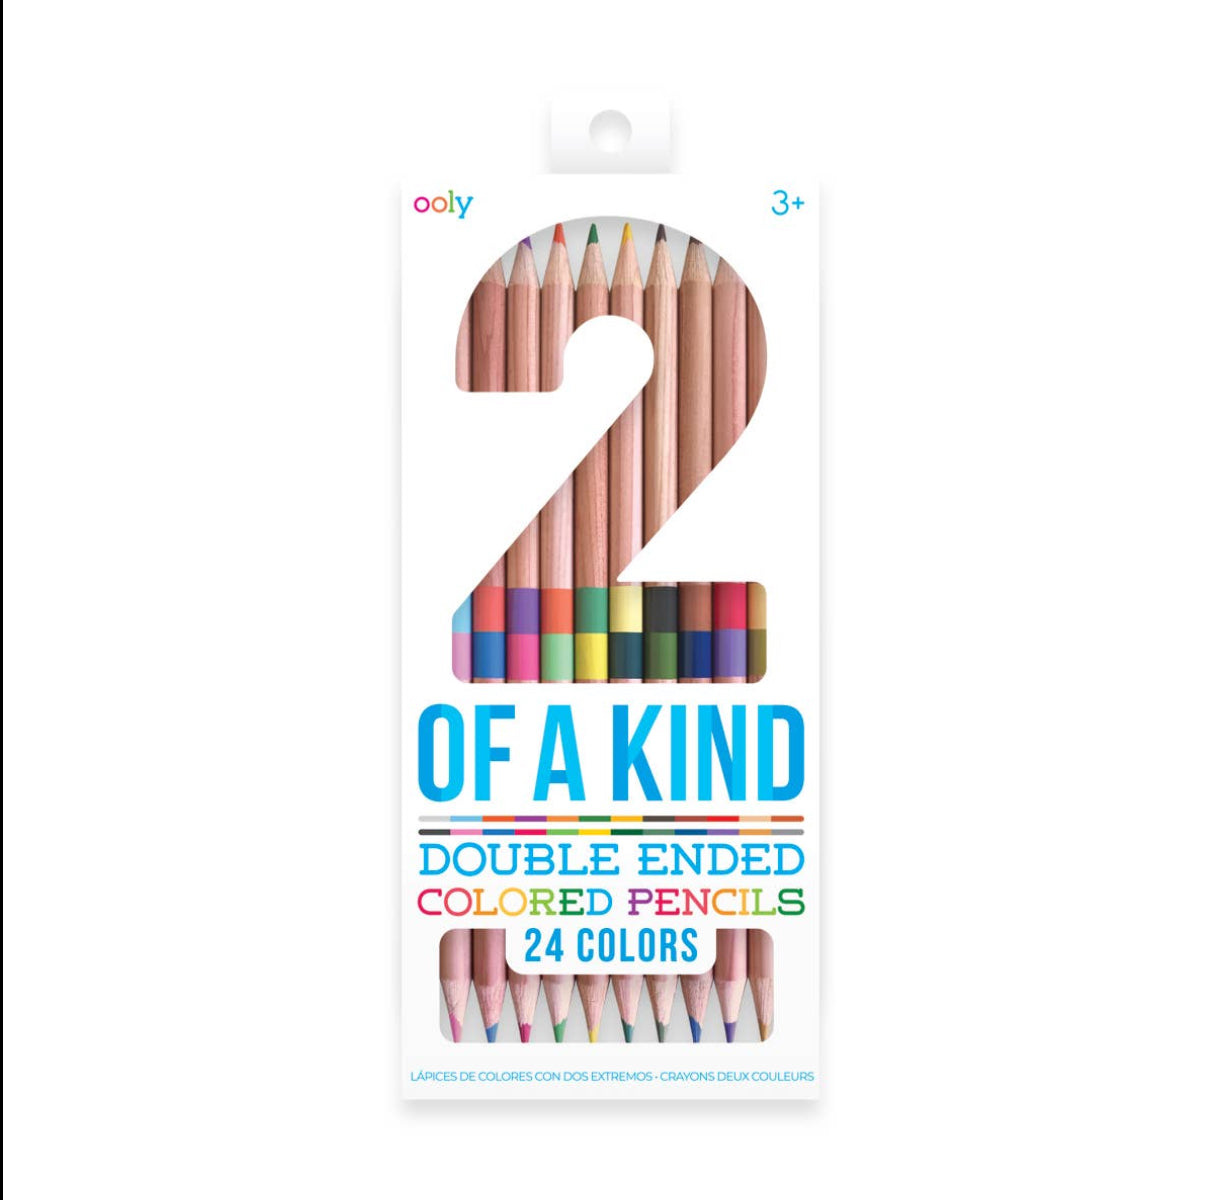 2 of a Kind: Double Ended Colored Pencils